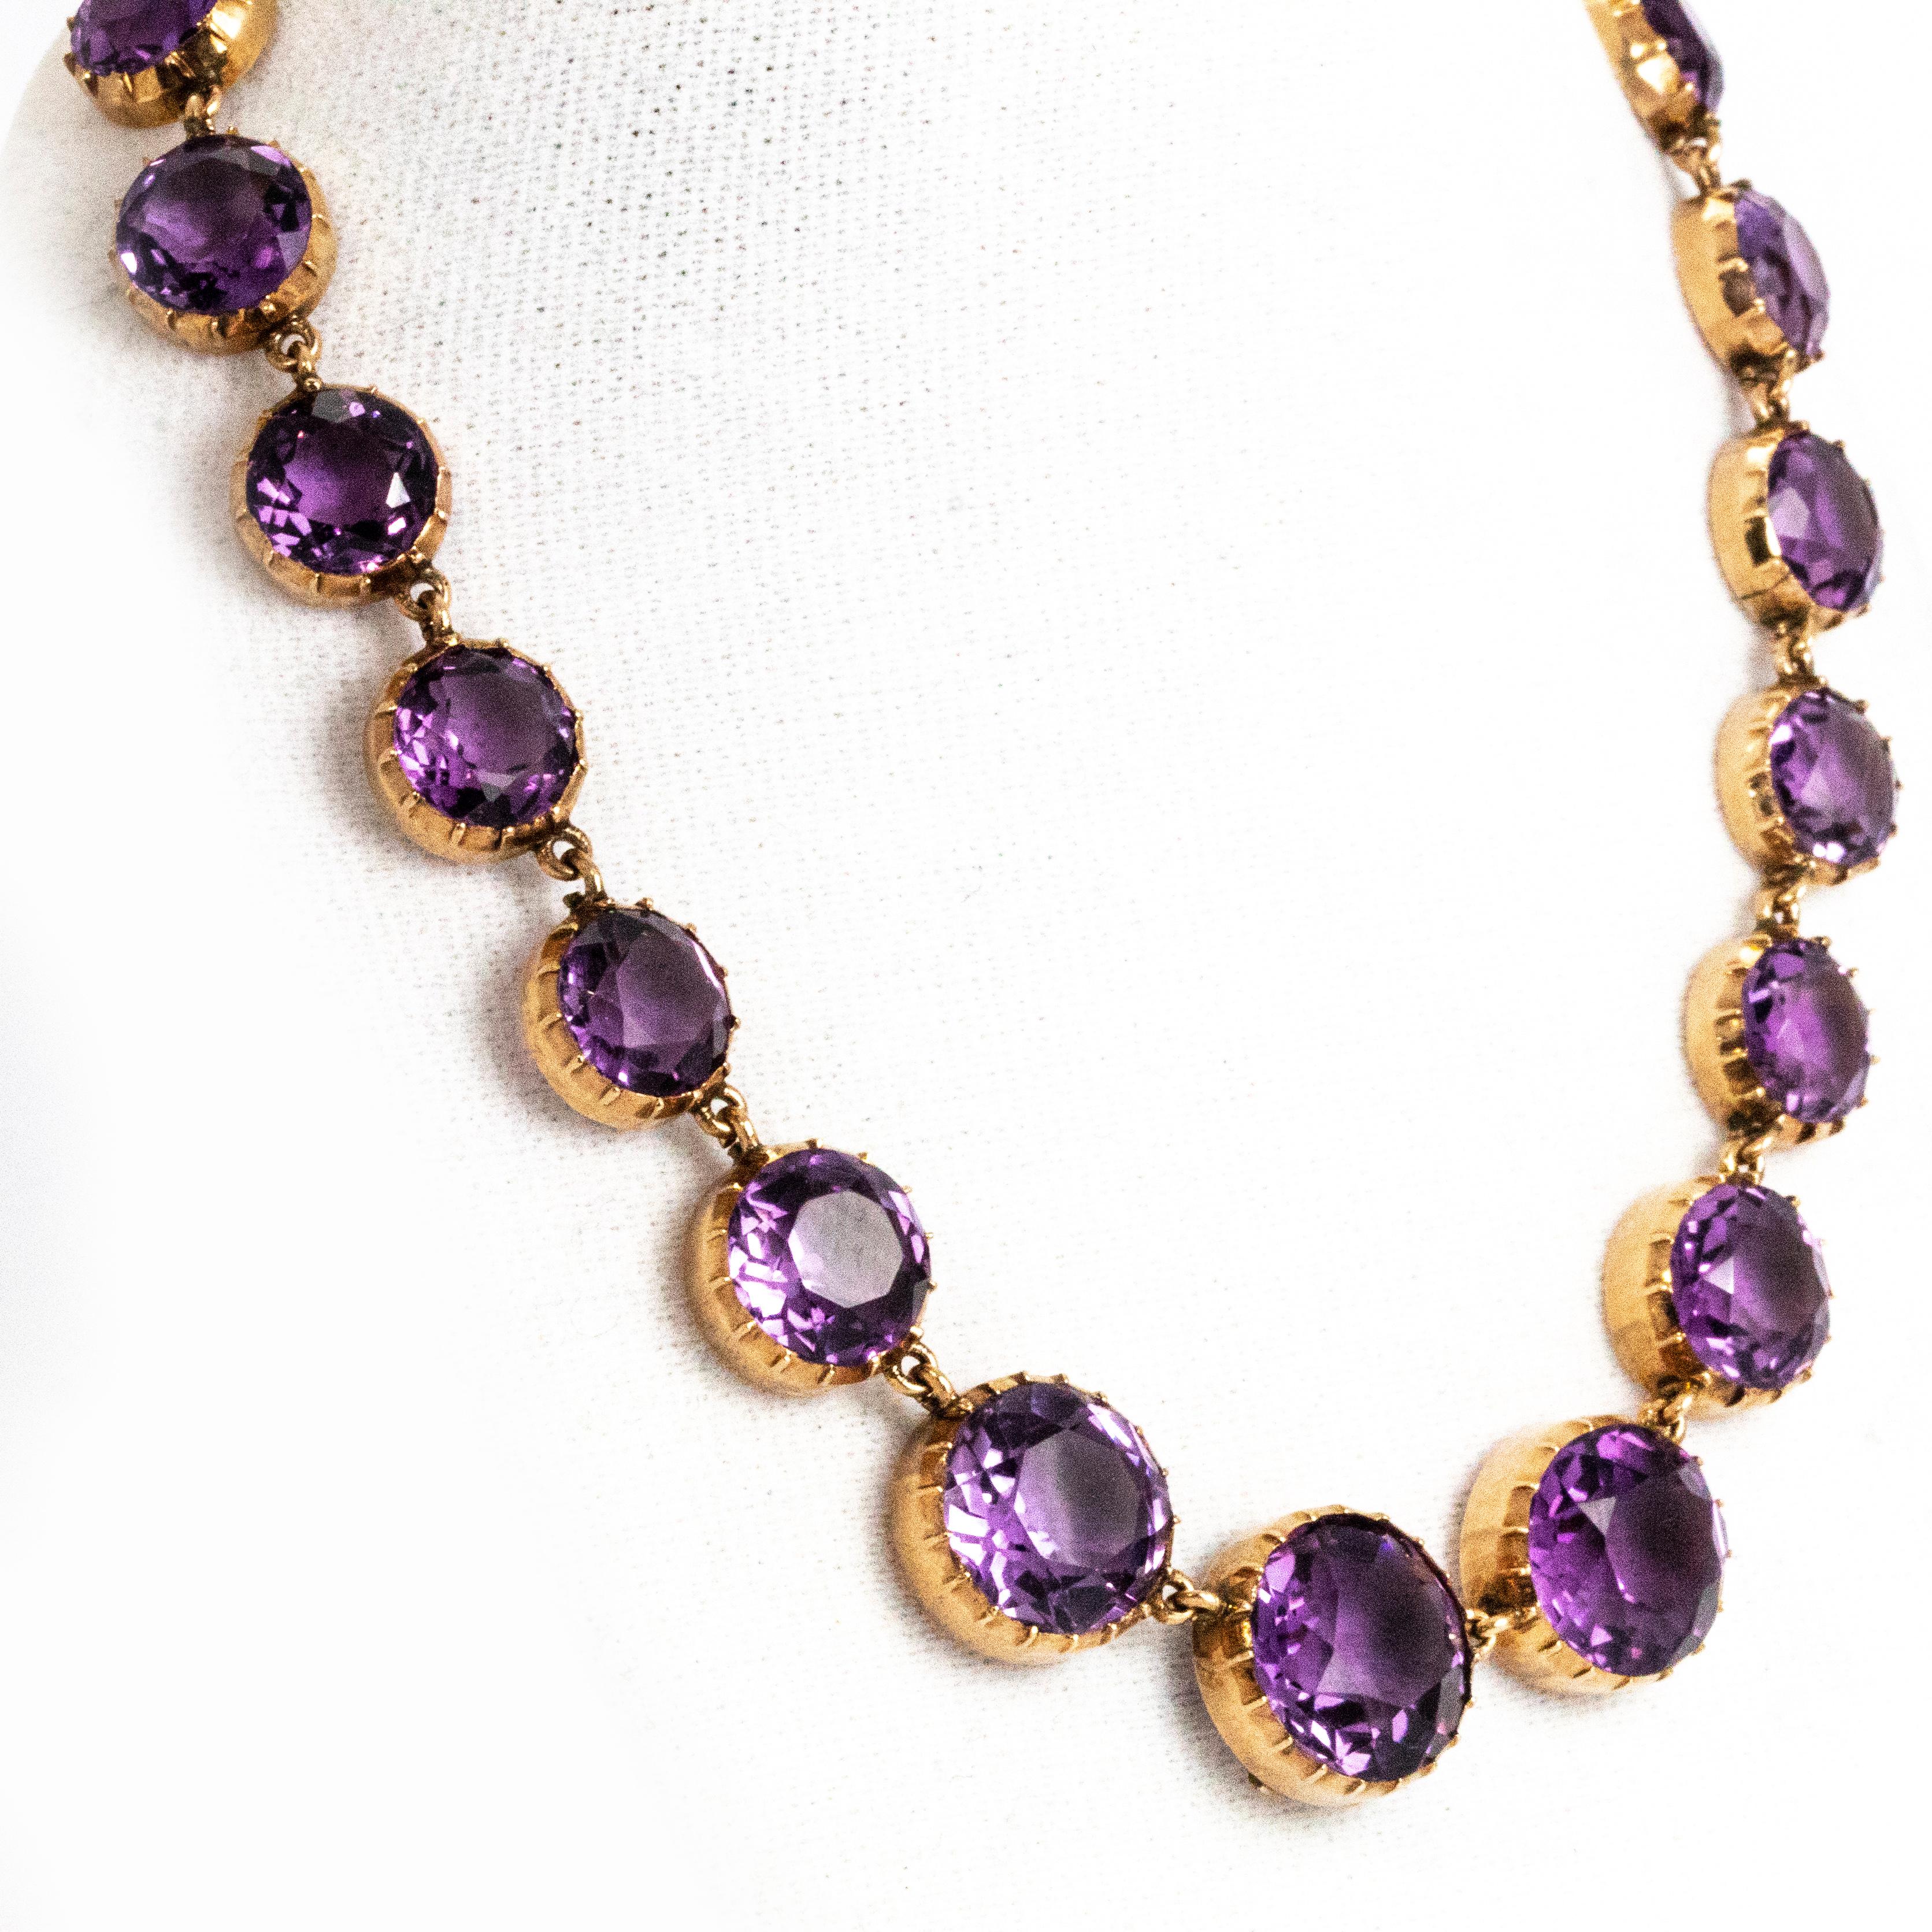 This wonderful antique mid-Victorian Riviere necklace is fully set with beautiful round-cut graduated amethysts. The stones have great height and sit elegantly in uniform pie-crust settings. There is a great pendant loop which folds behind the